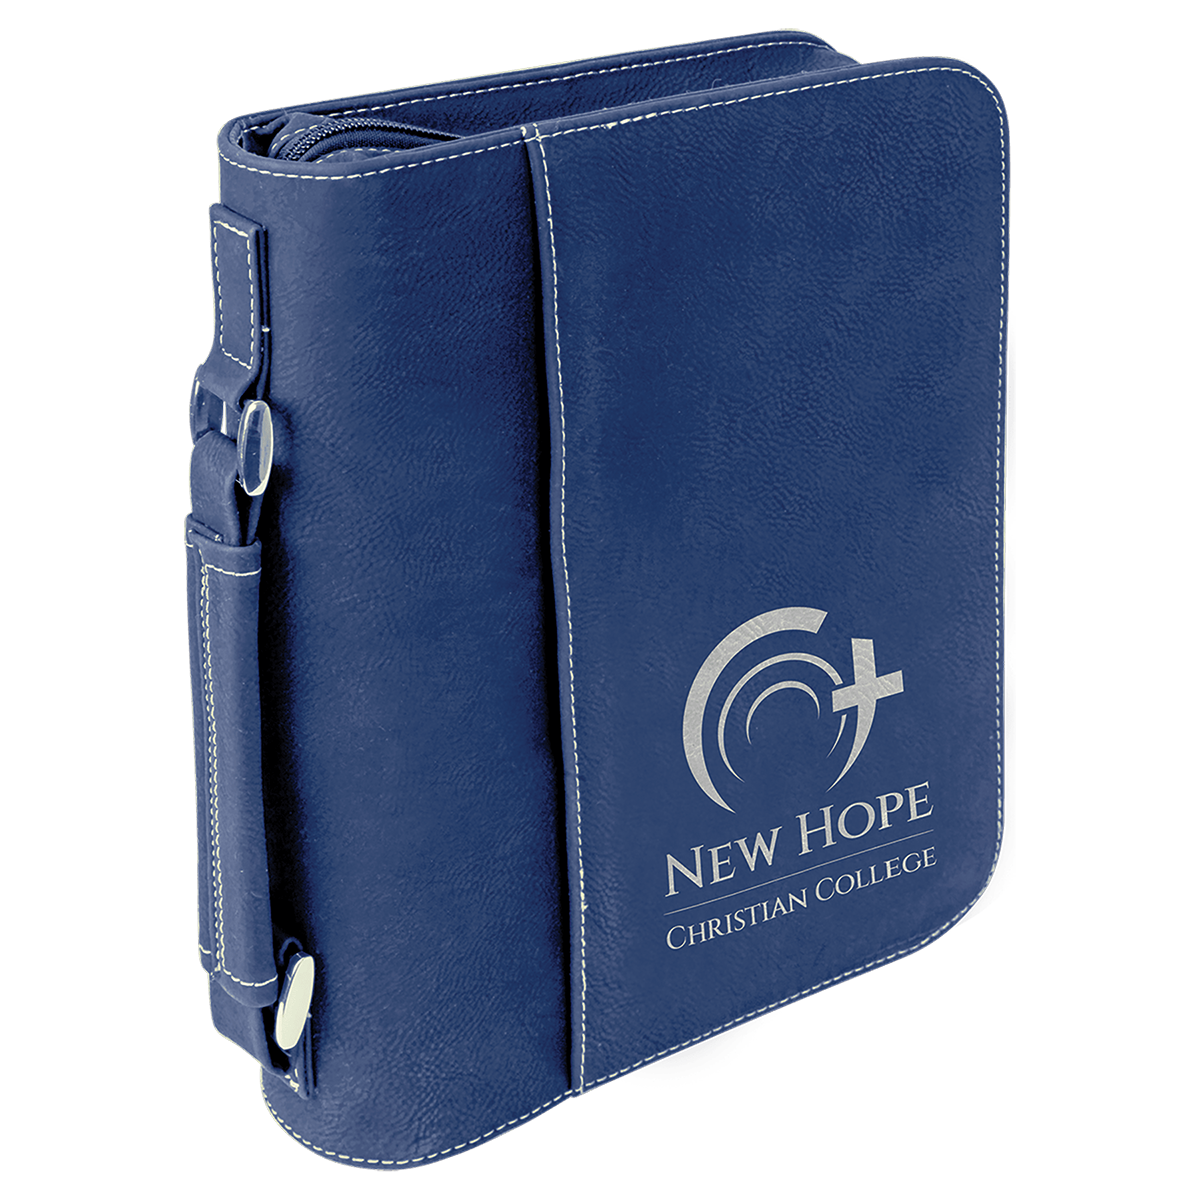 Leatherette Book/Bible Cover